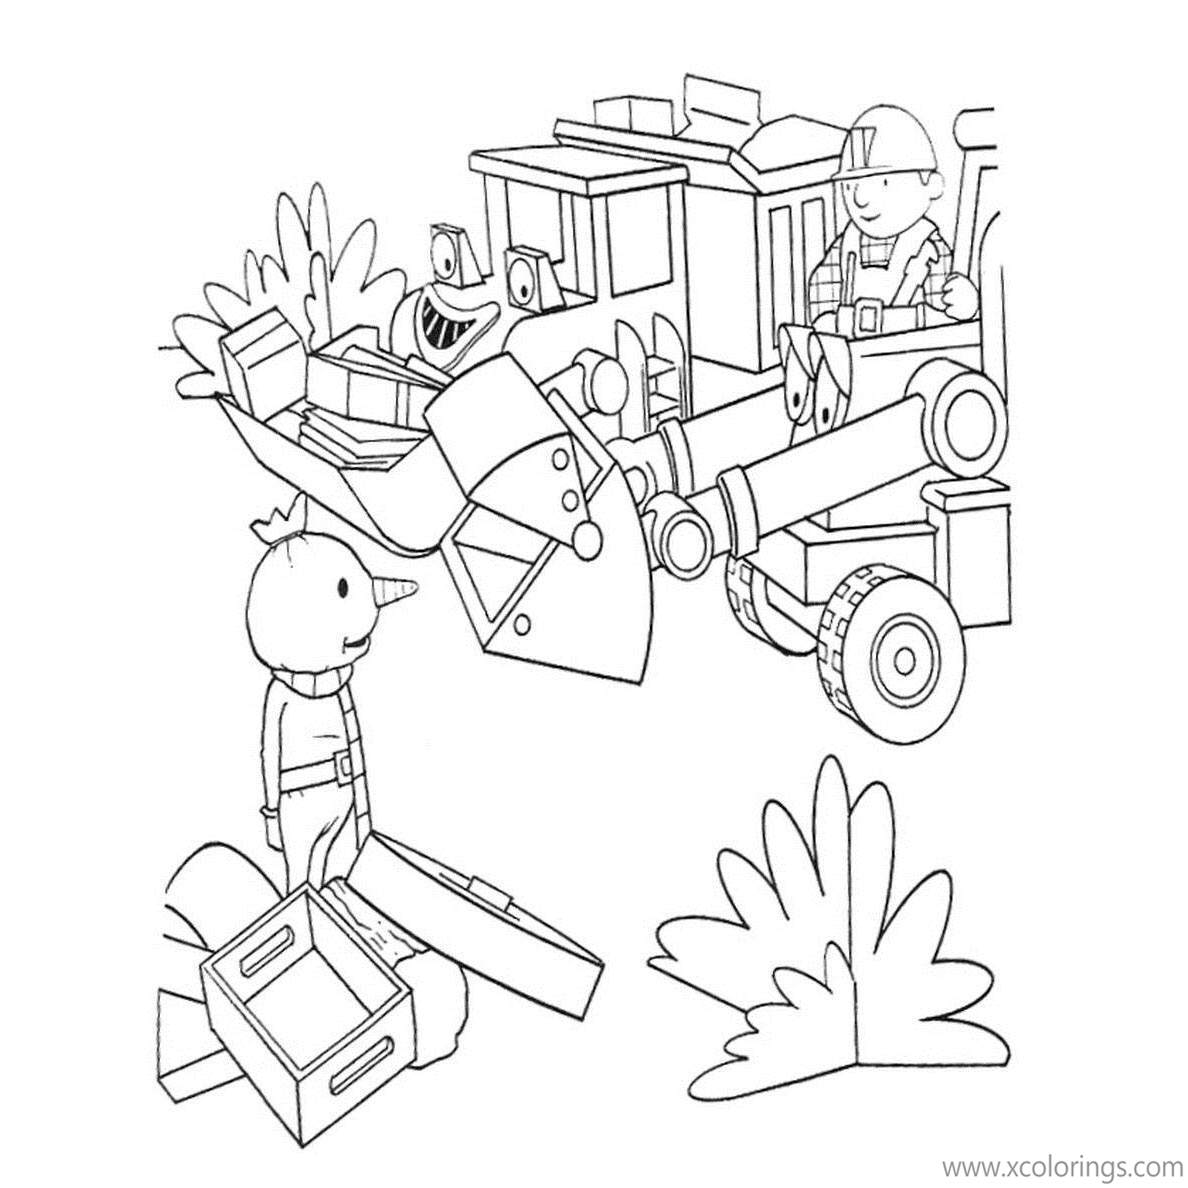 Free Bob the Builder Coloring Pages Bob Muck and Spud printable